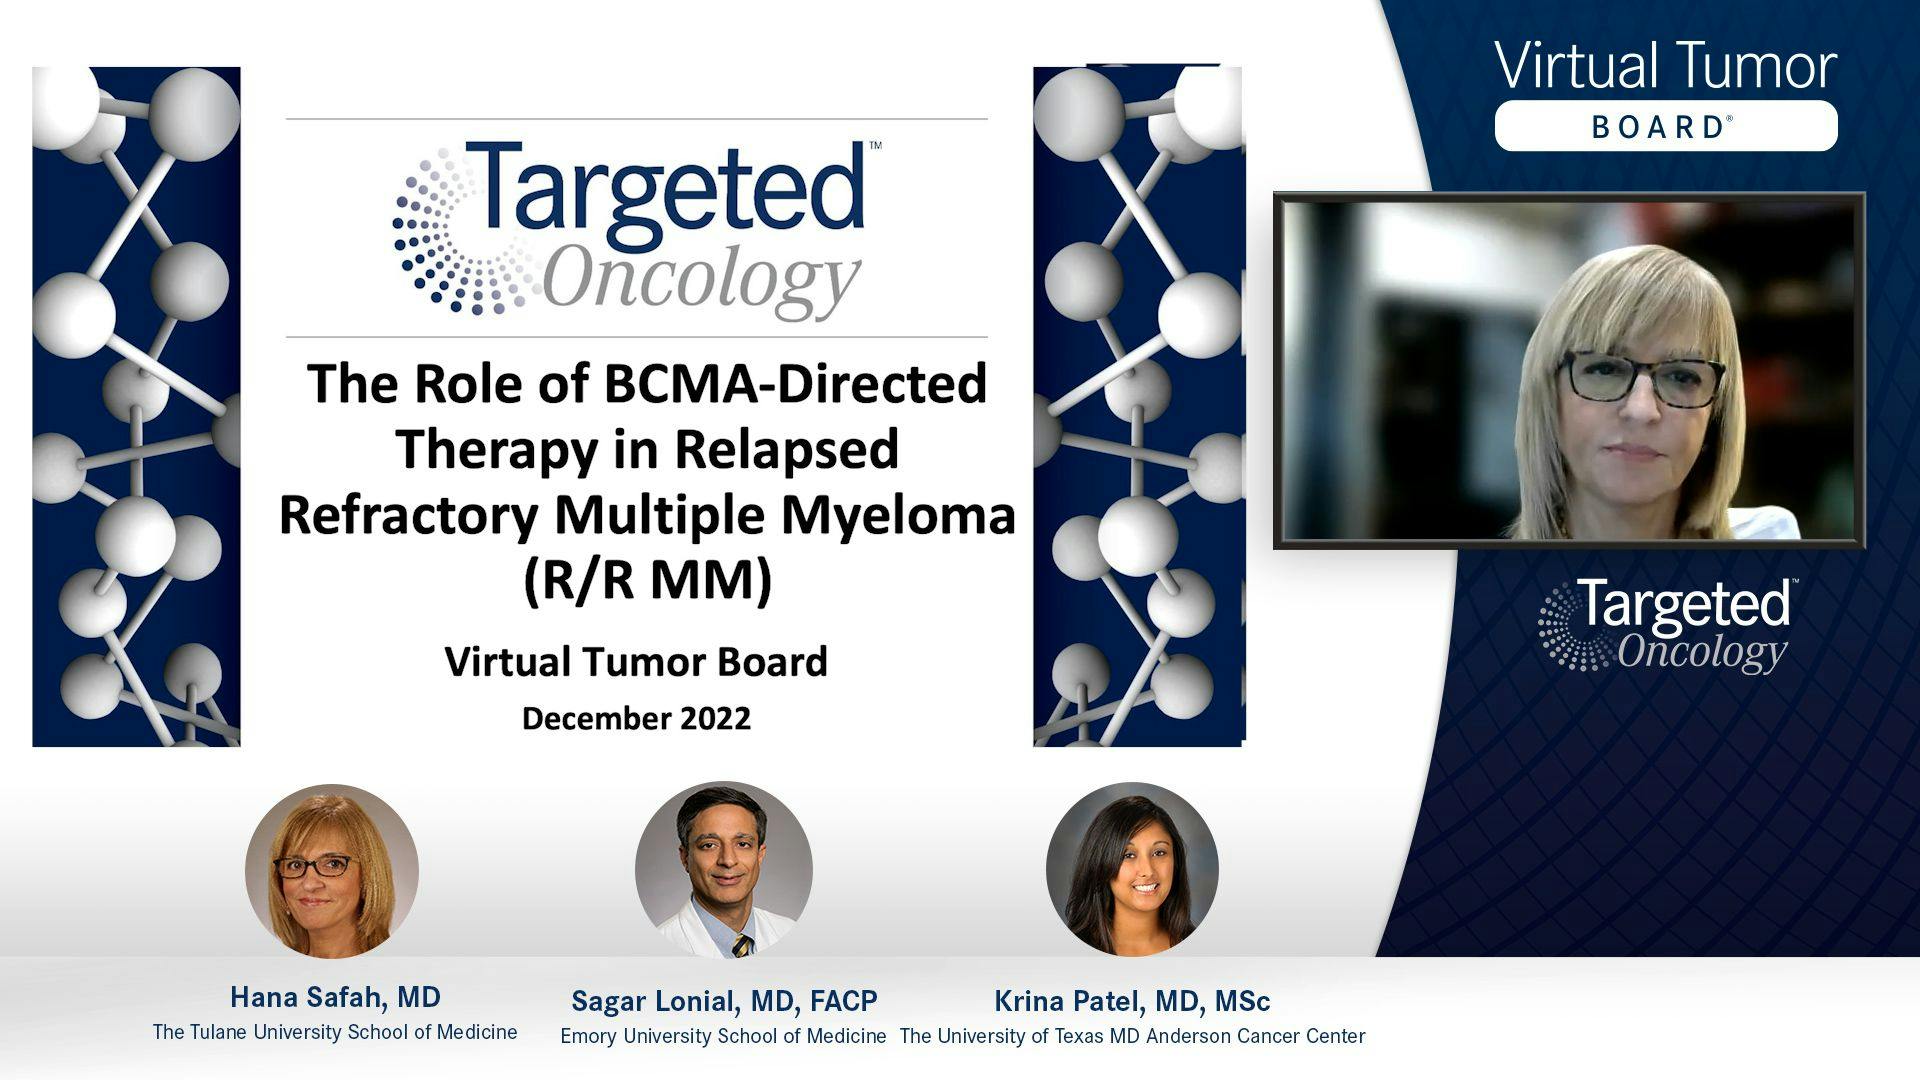 Case 2: Treatment of R/R MM with BCMA-Directed CAR T-Cell Therapy